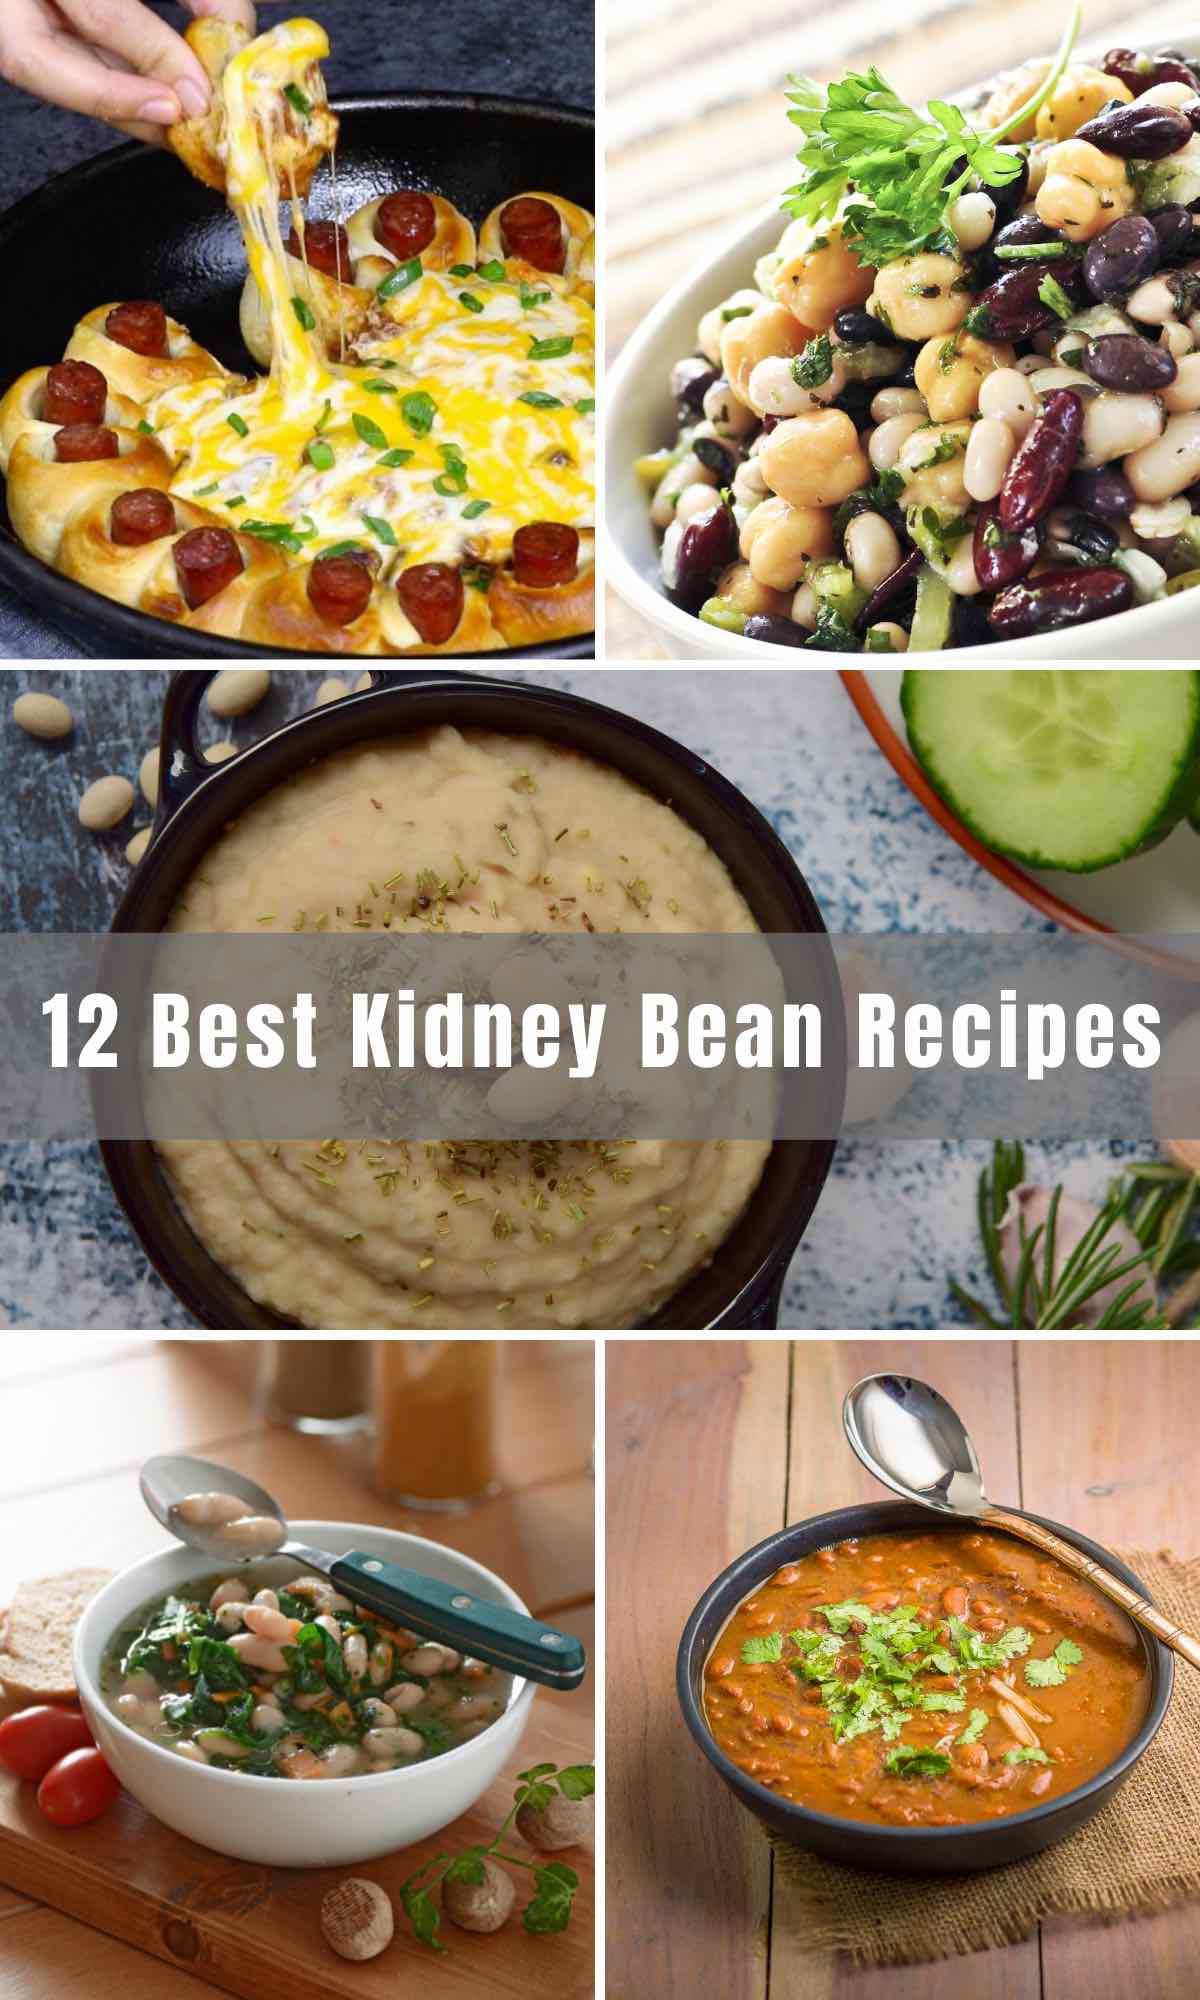 If you can find a can of kidney beans in your pantry, you’re well on your way to preparing a healthy, wholesome meal. We’ve rounded up 12 of the Best Kidney Bean Recipes that are easy to make at home.